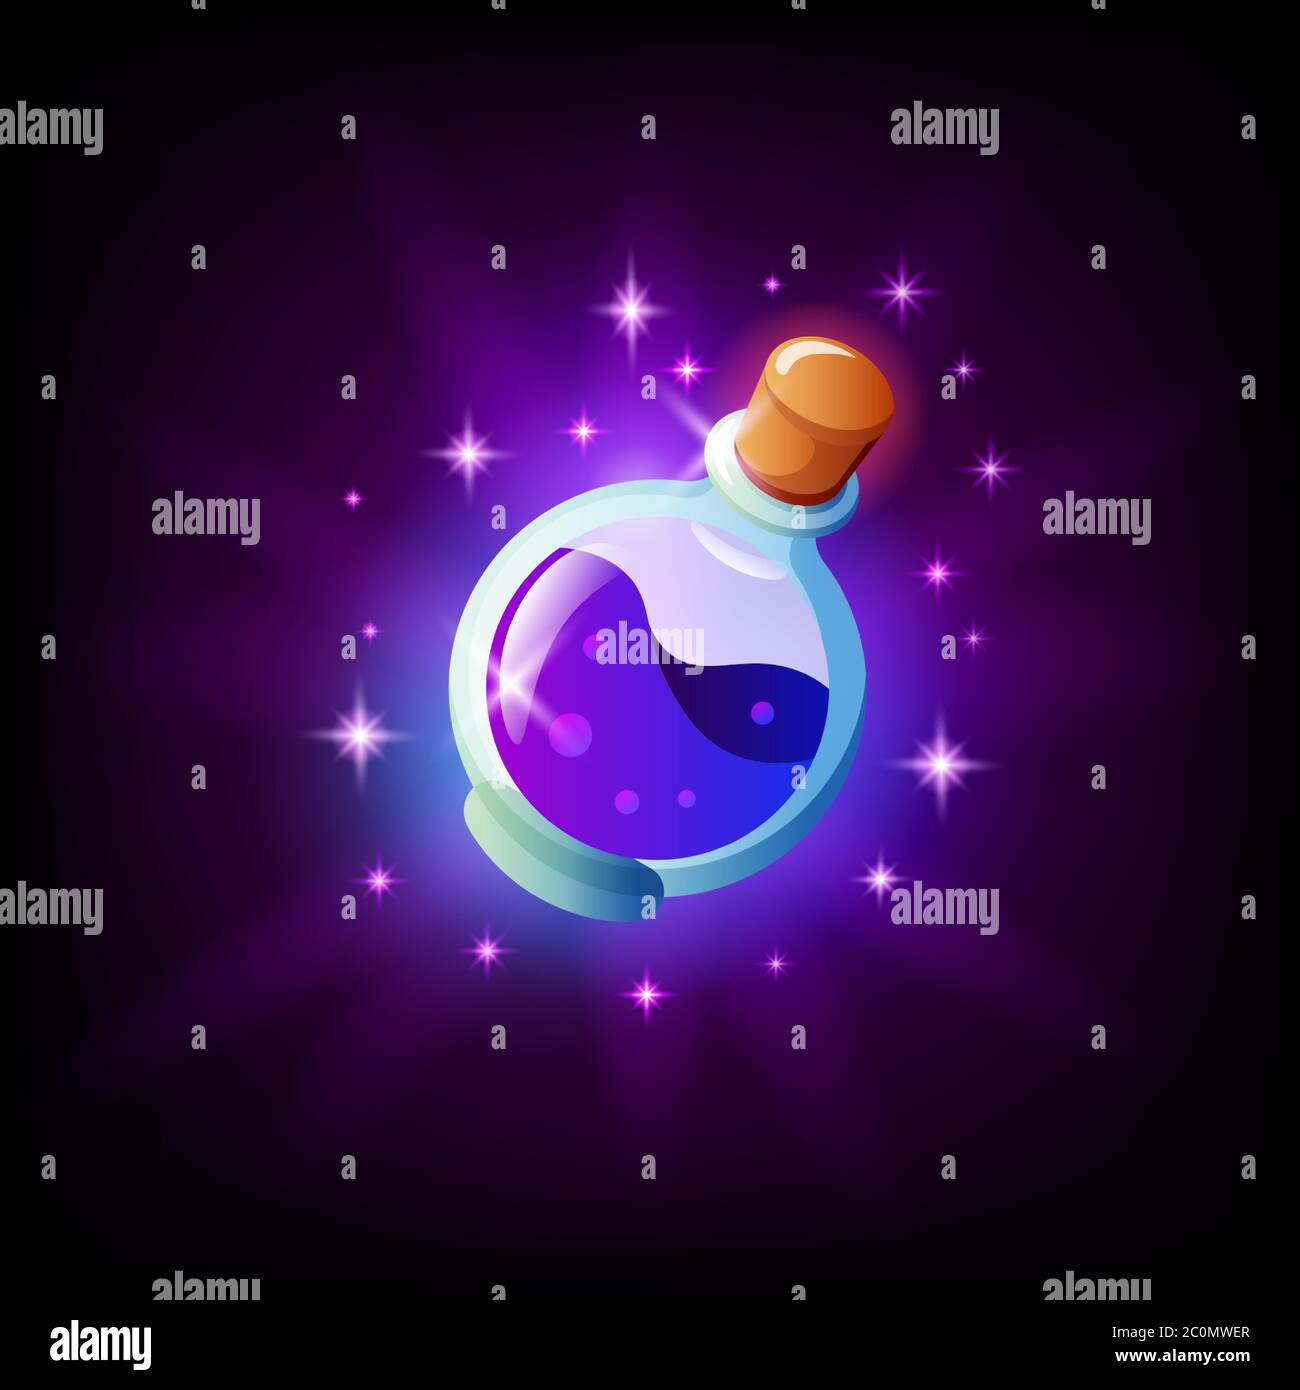 Bottle of magic potion icon for graphic user interface, dark background. Vial of elixir mobile app or pc game element. Vector illustration in cartoon Stock Vector